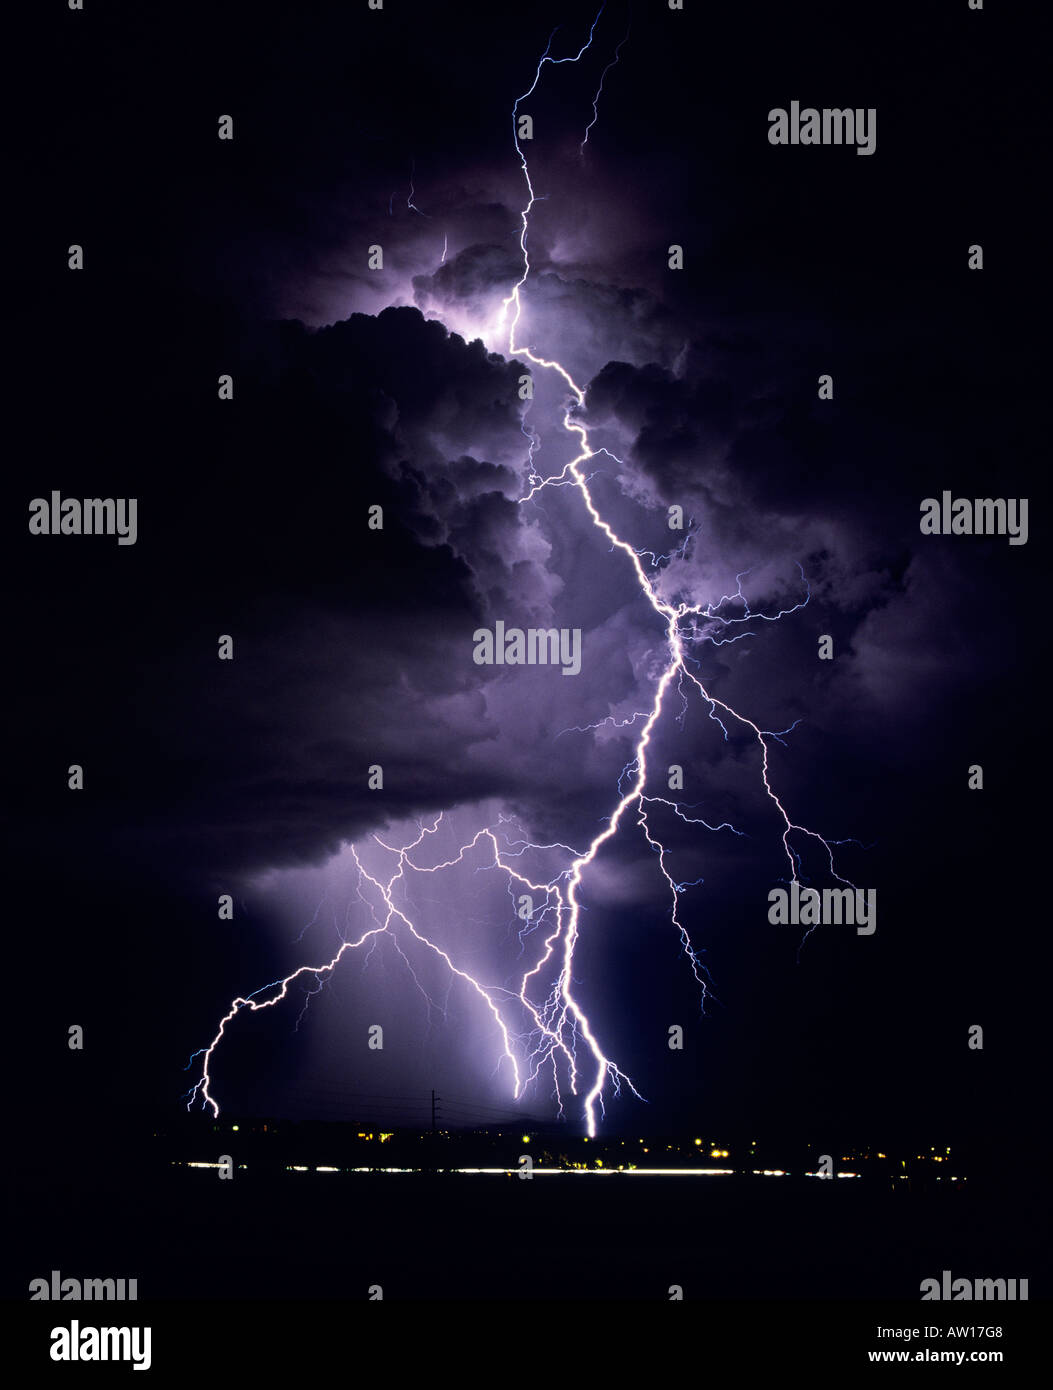 Lightning bolts strike dramatically from a dark and stormy sky. The clouds glow purple and are ominous against the dark night. Stock Photo